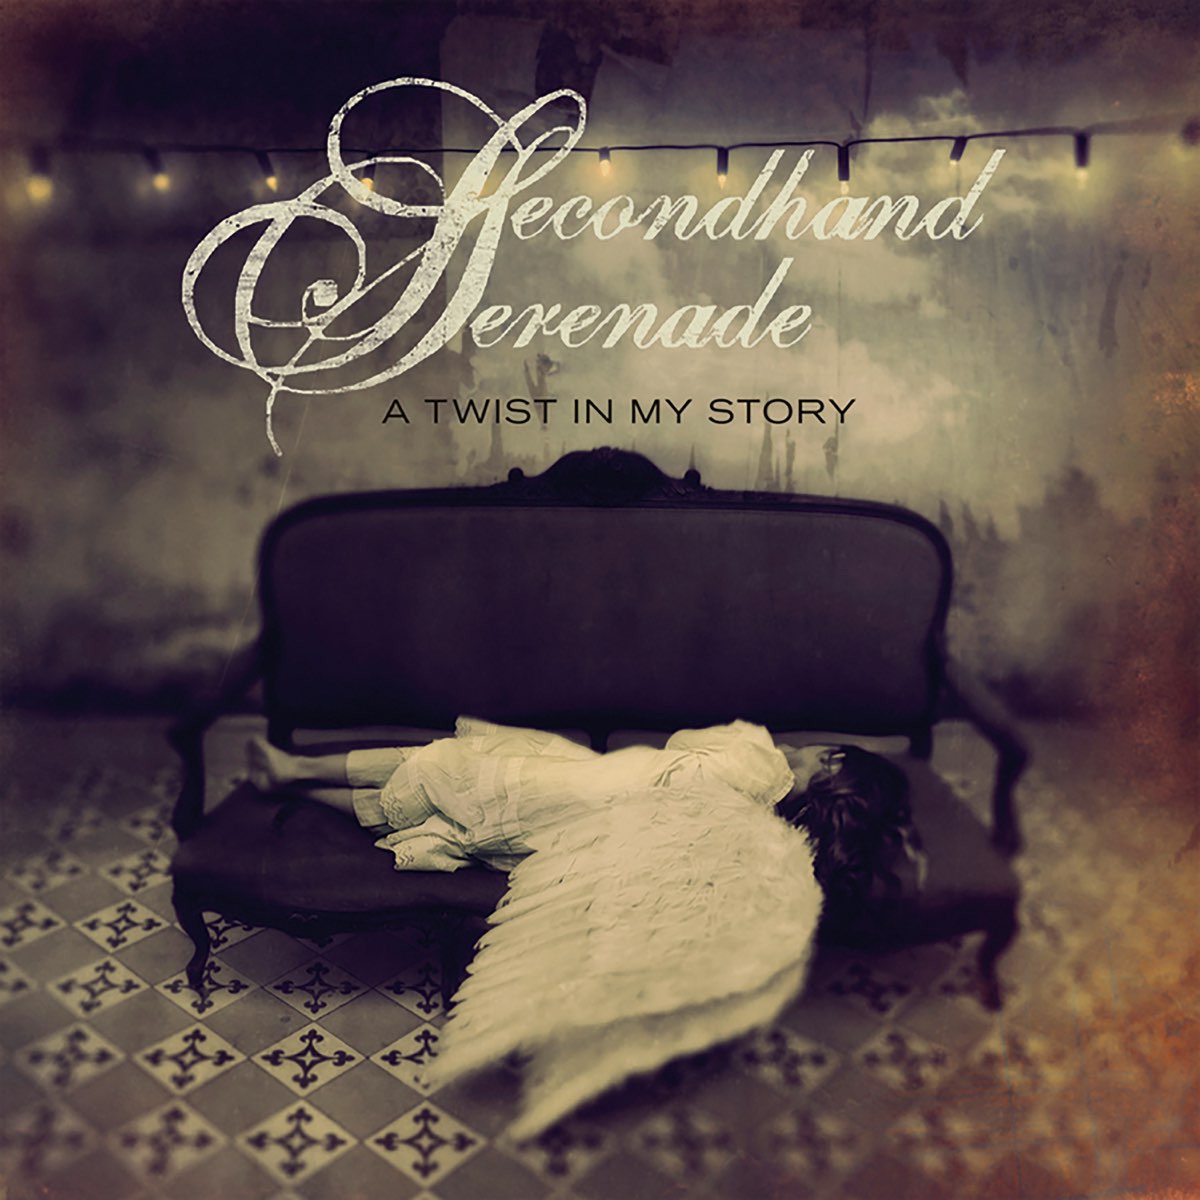 ‎A Twist in My Story - Album by Secondhand Serenade - Apple Music